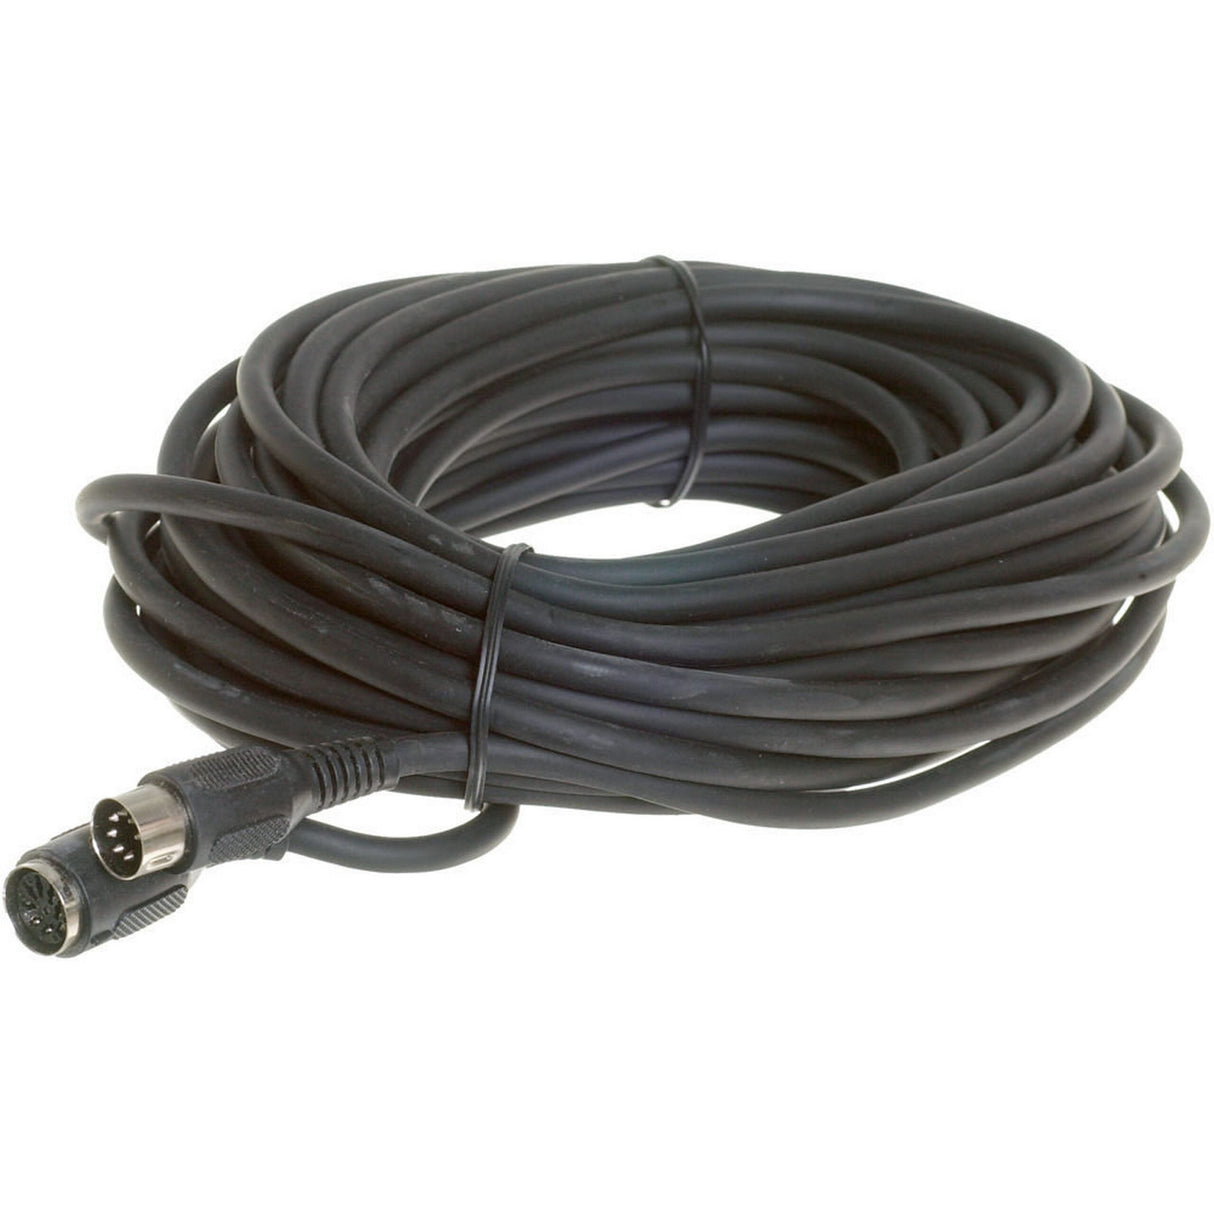 Bescor RE20 Remote Extension Cable for MP101, 20 Foot